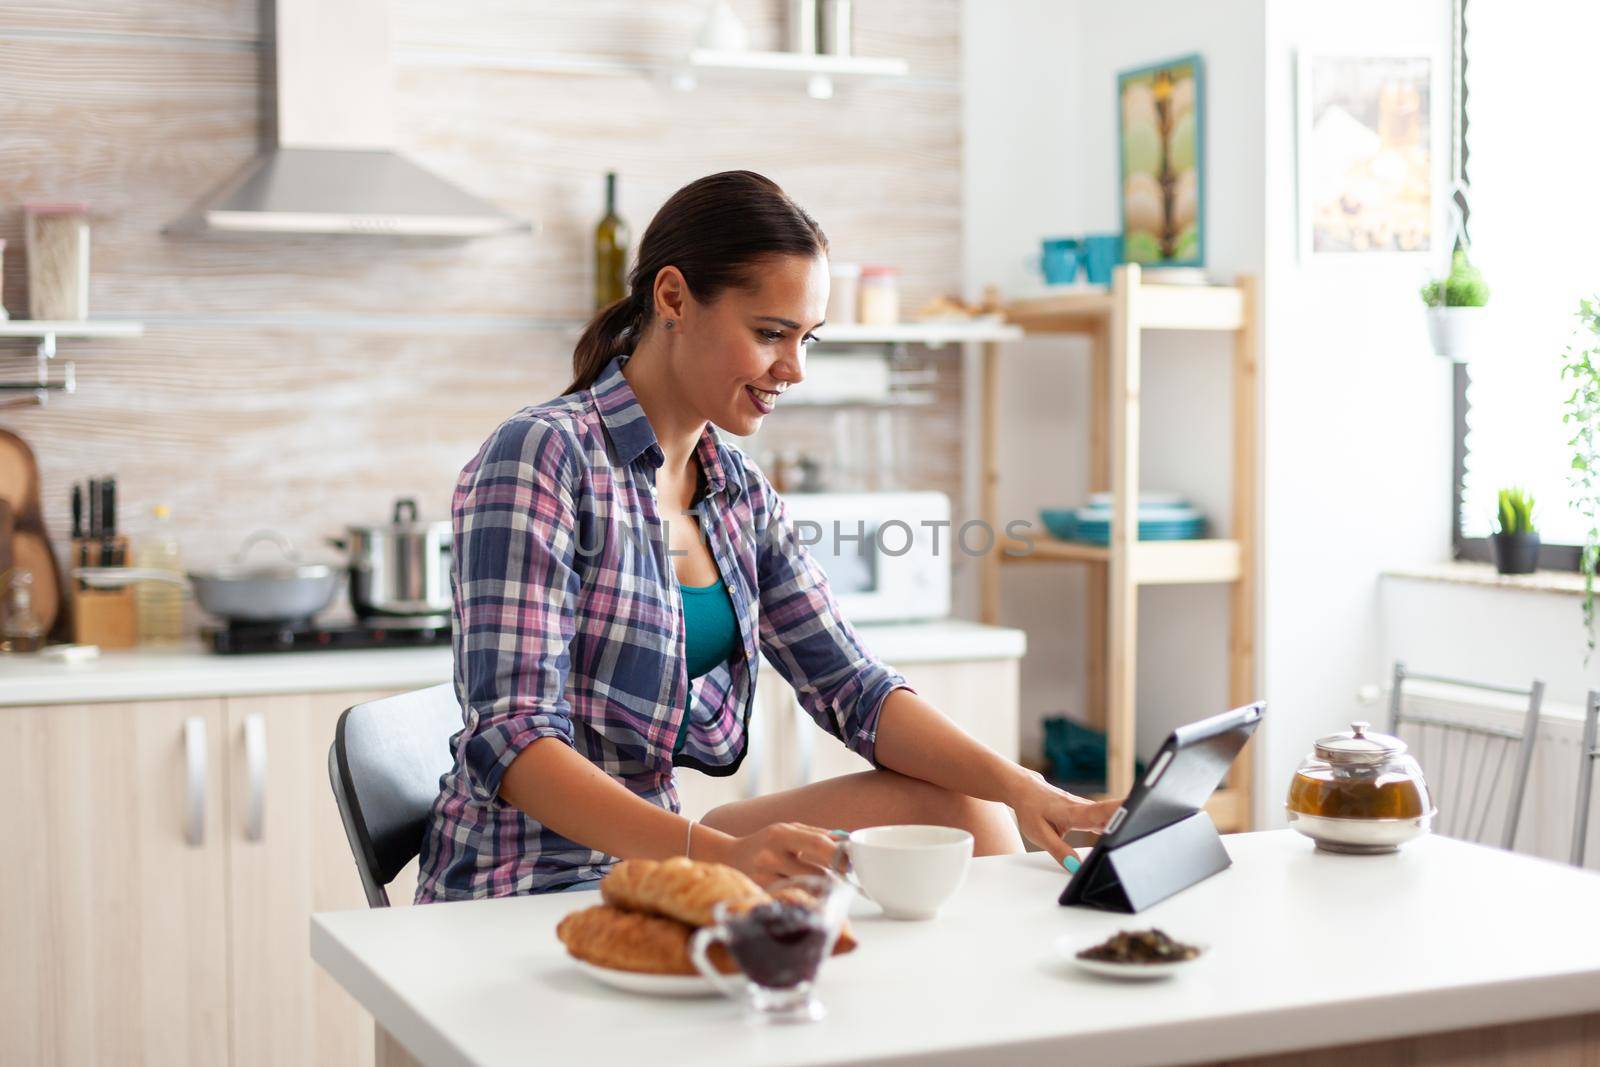 Woman browsing on tablet pc during breakfast in kitchen and holding cup of green tea. Working from home using device with internet technology, typing, on gadget during breakfast.